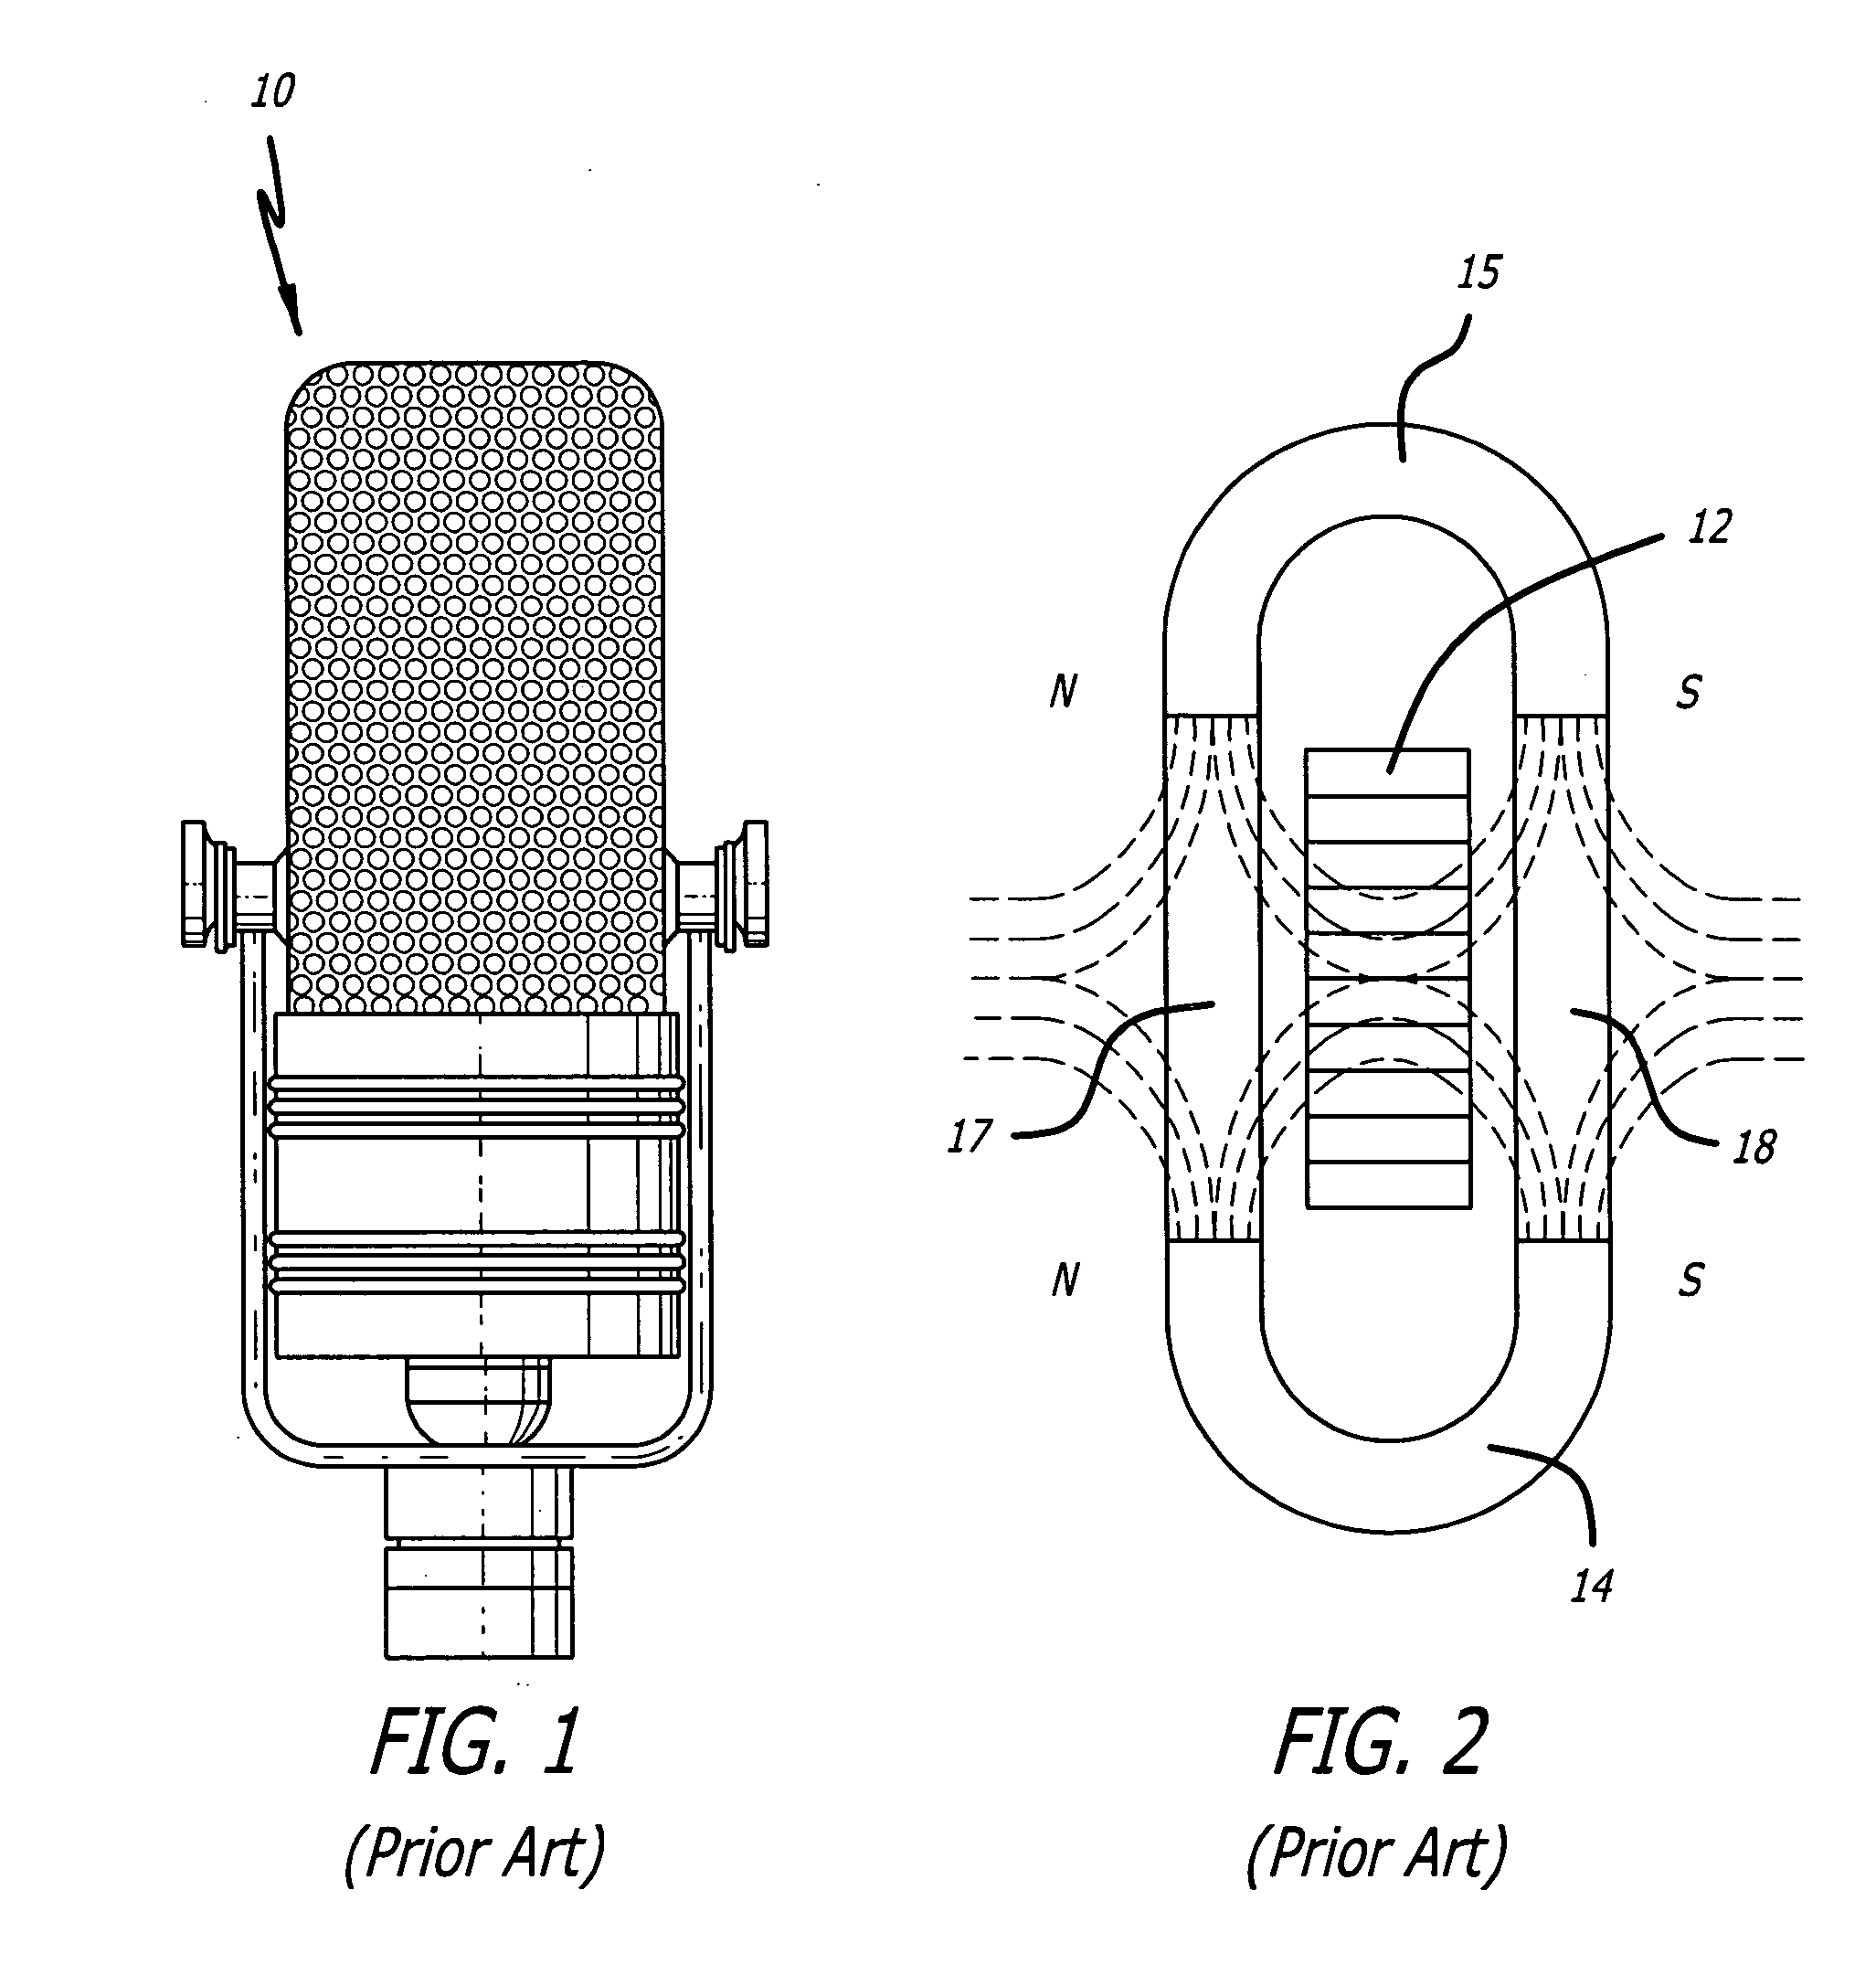 Ribbon microphone incorporating a special-purpose transformer and/or other transducer-output circuitry